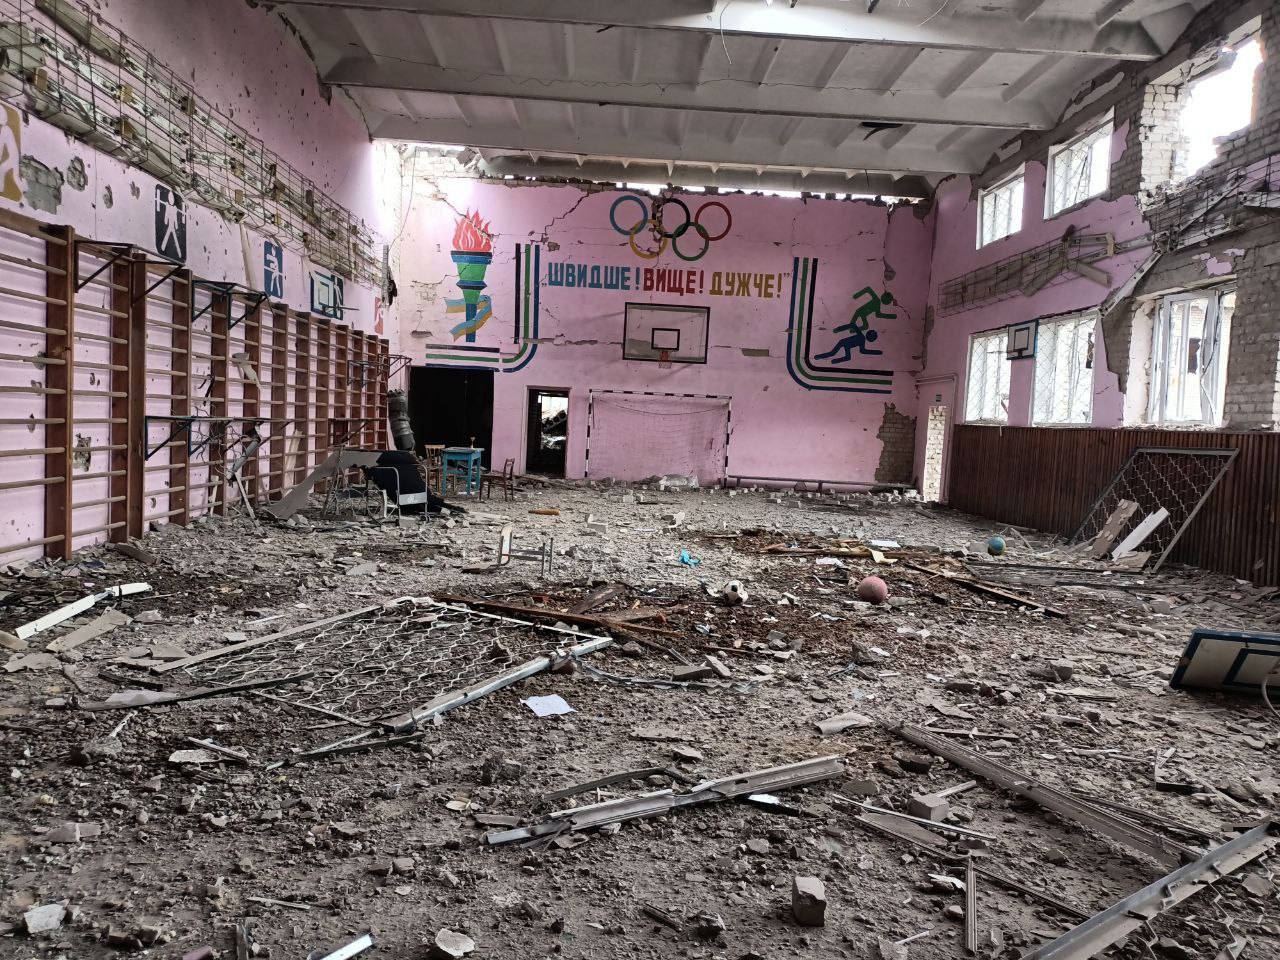 A school gym stands in ruins, having suffered bombardment during the Russian occupation. Credit: Nataliya Bordiychuk ~